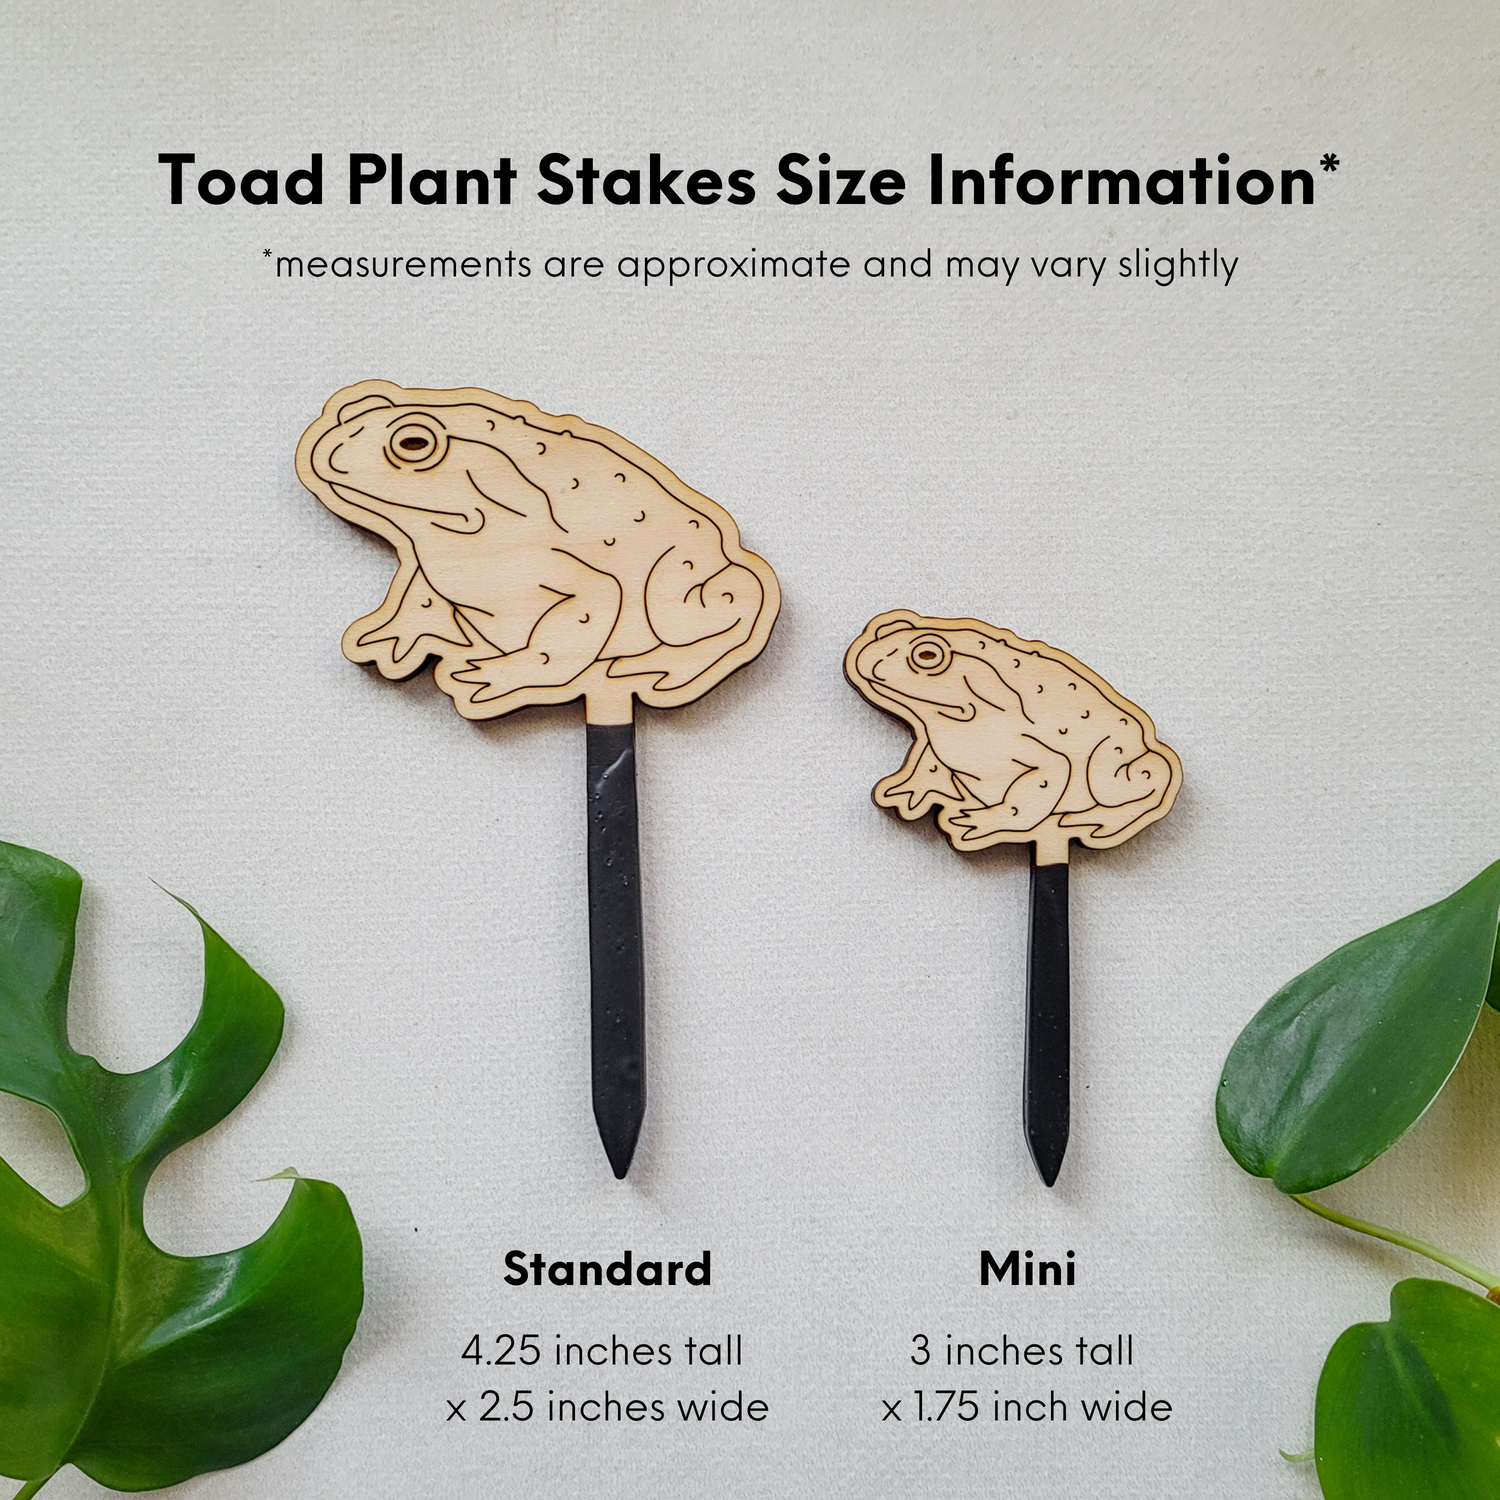 Size chart for toad decorative plant stakes. Two size options against a white background with measurement labels reflecting those in the written description.